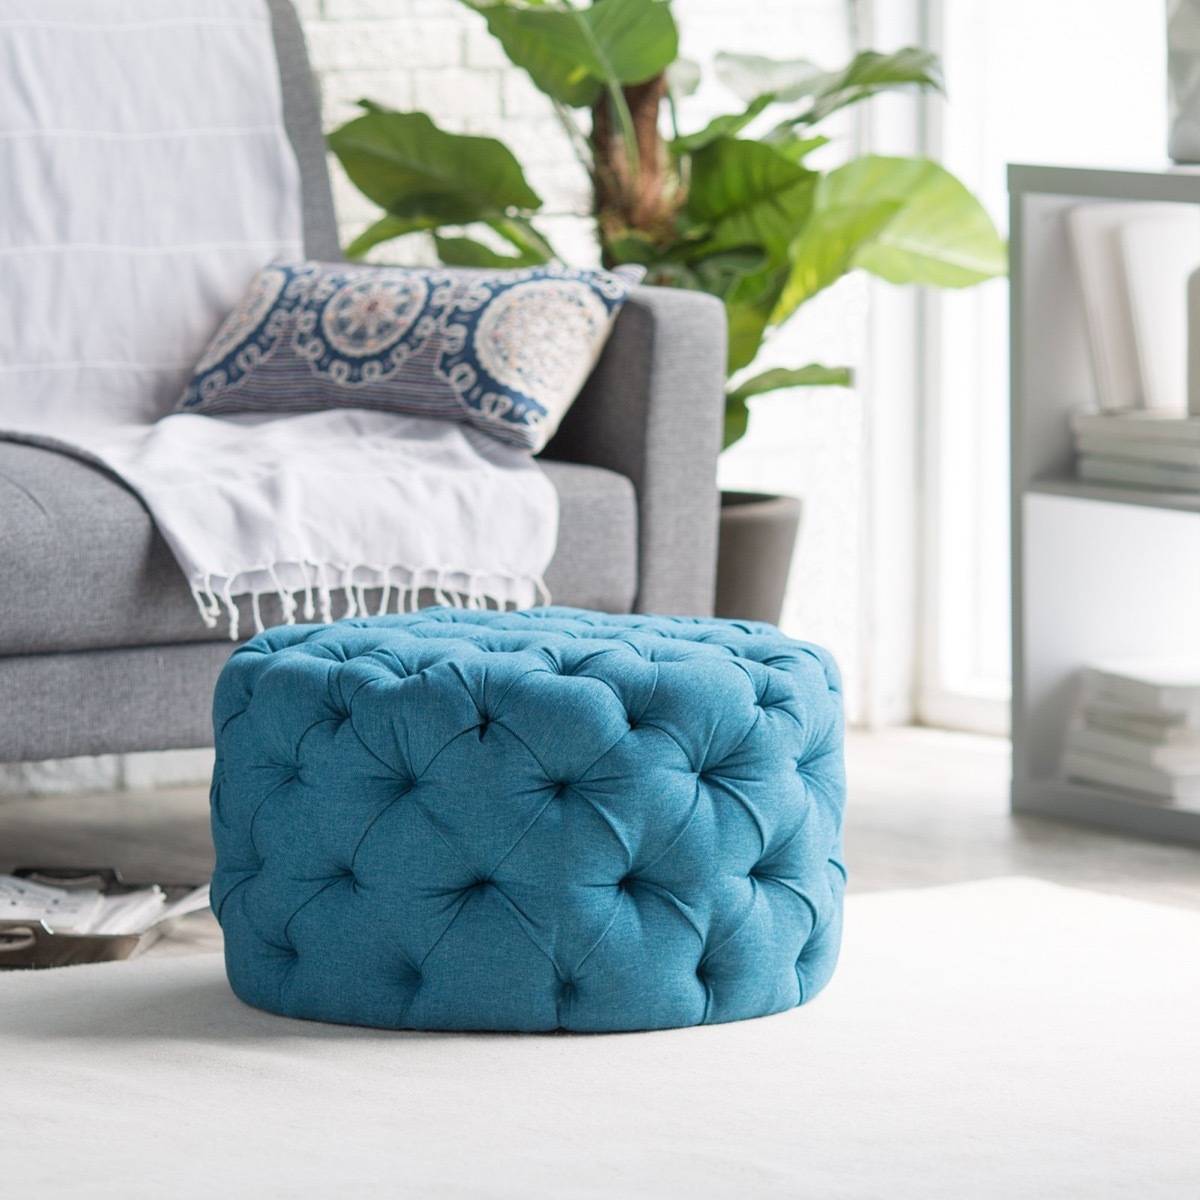 Allover tufted ottoman from Hayneedle